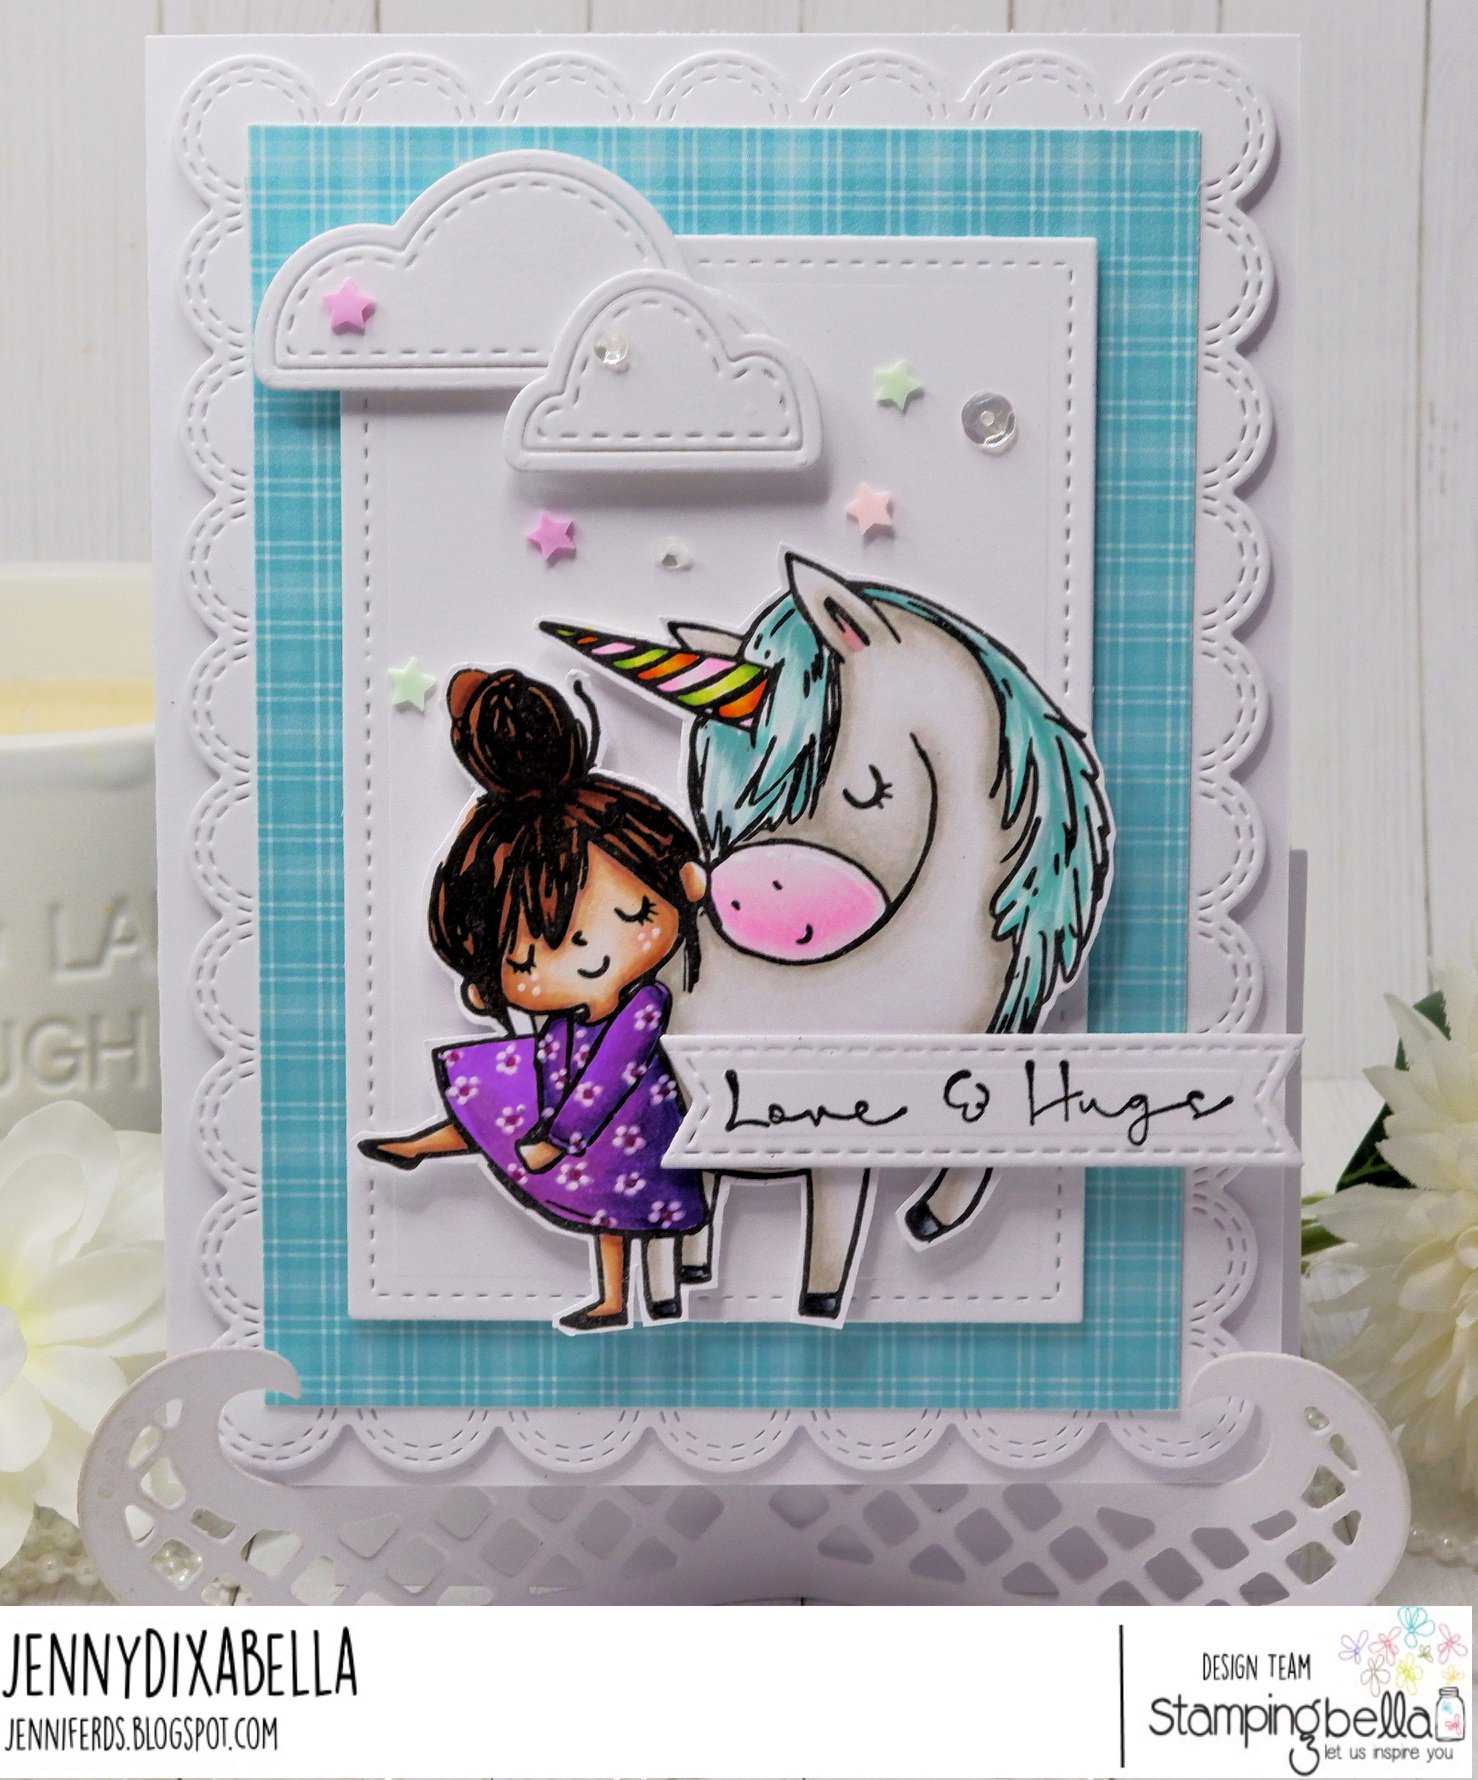 www.stampingbella.com: rubber stamp used: meet Rosie and bernie card by Jenny Dix